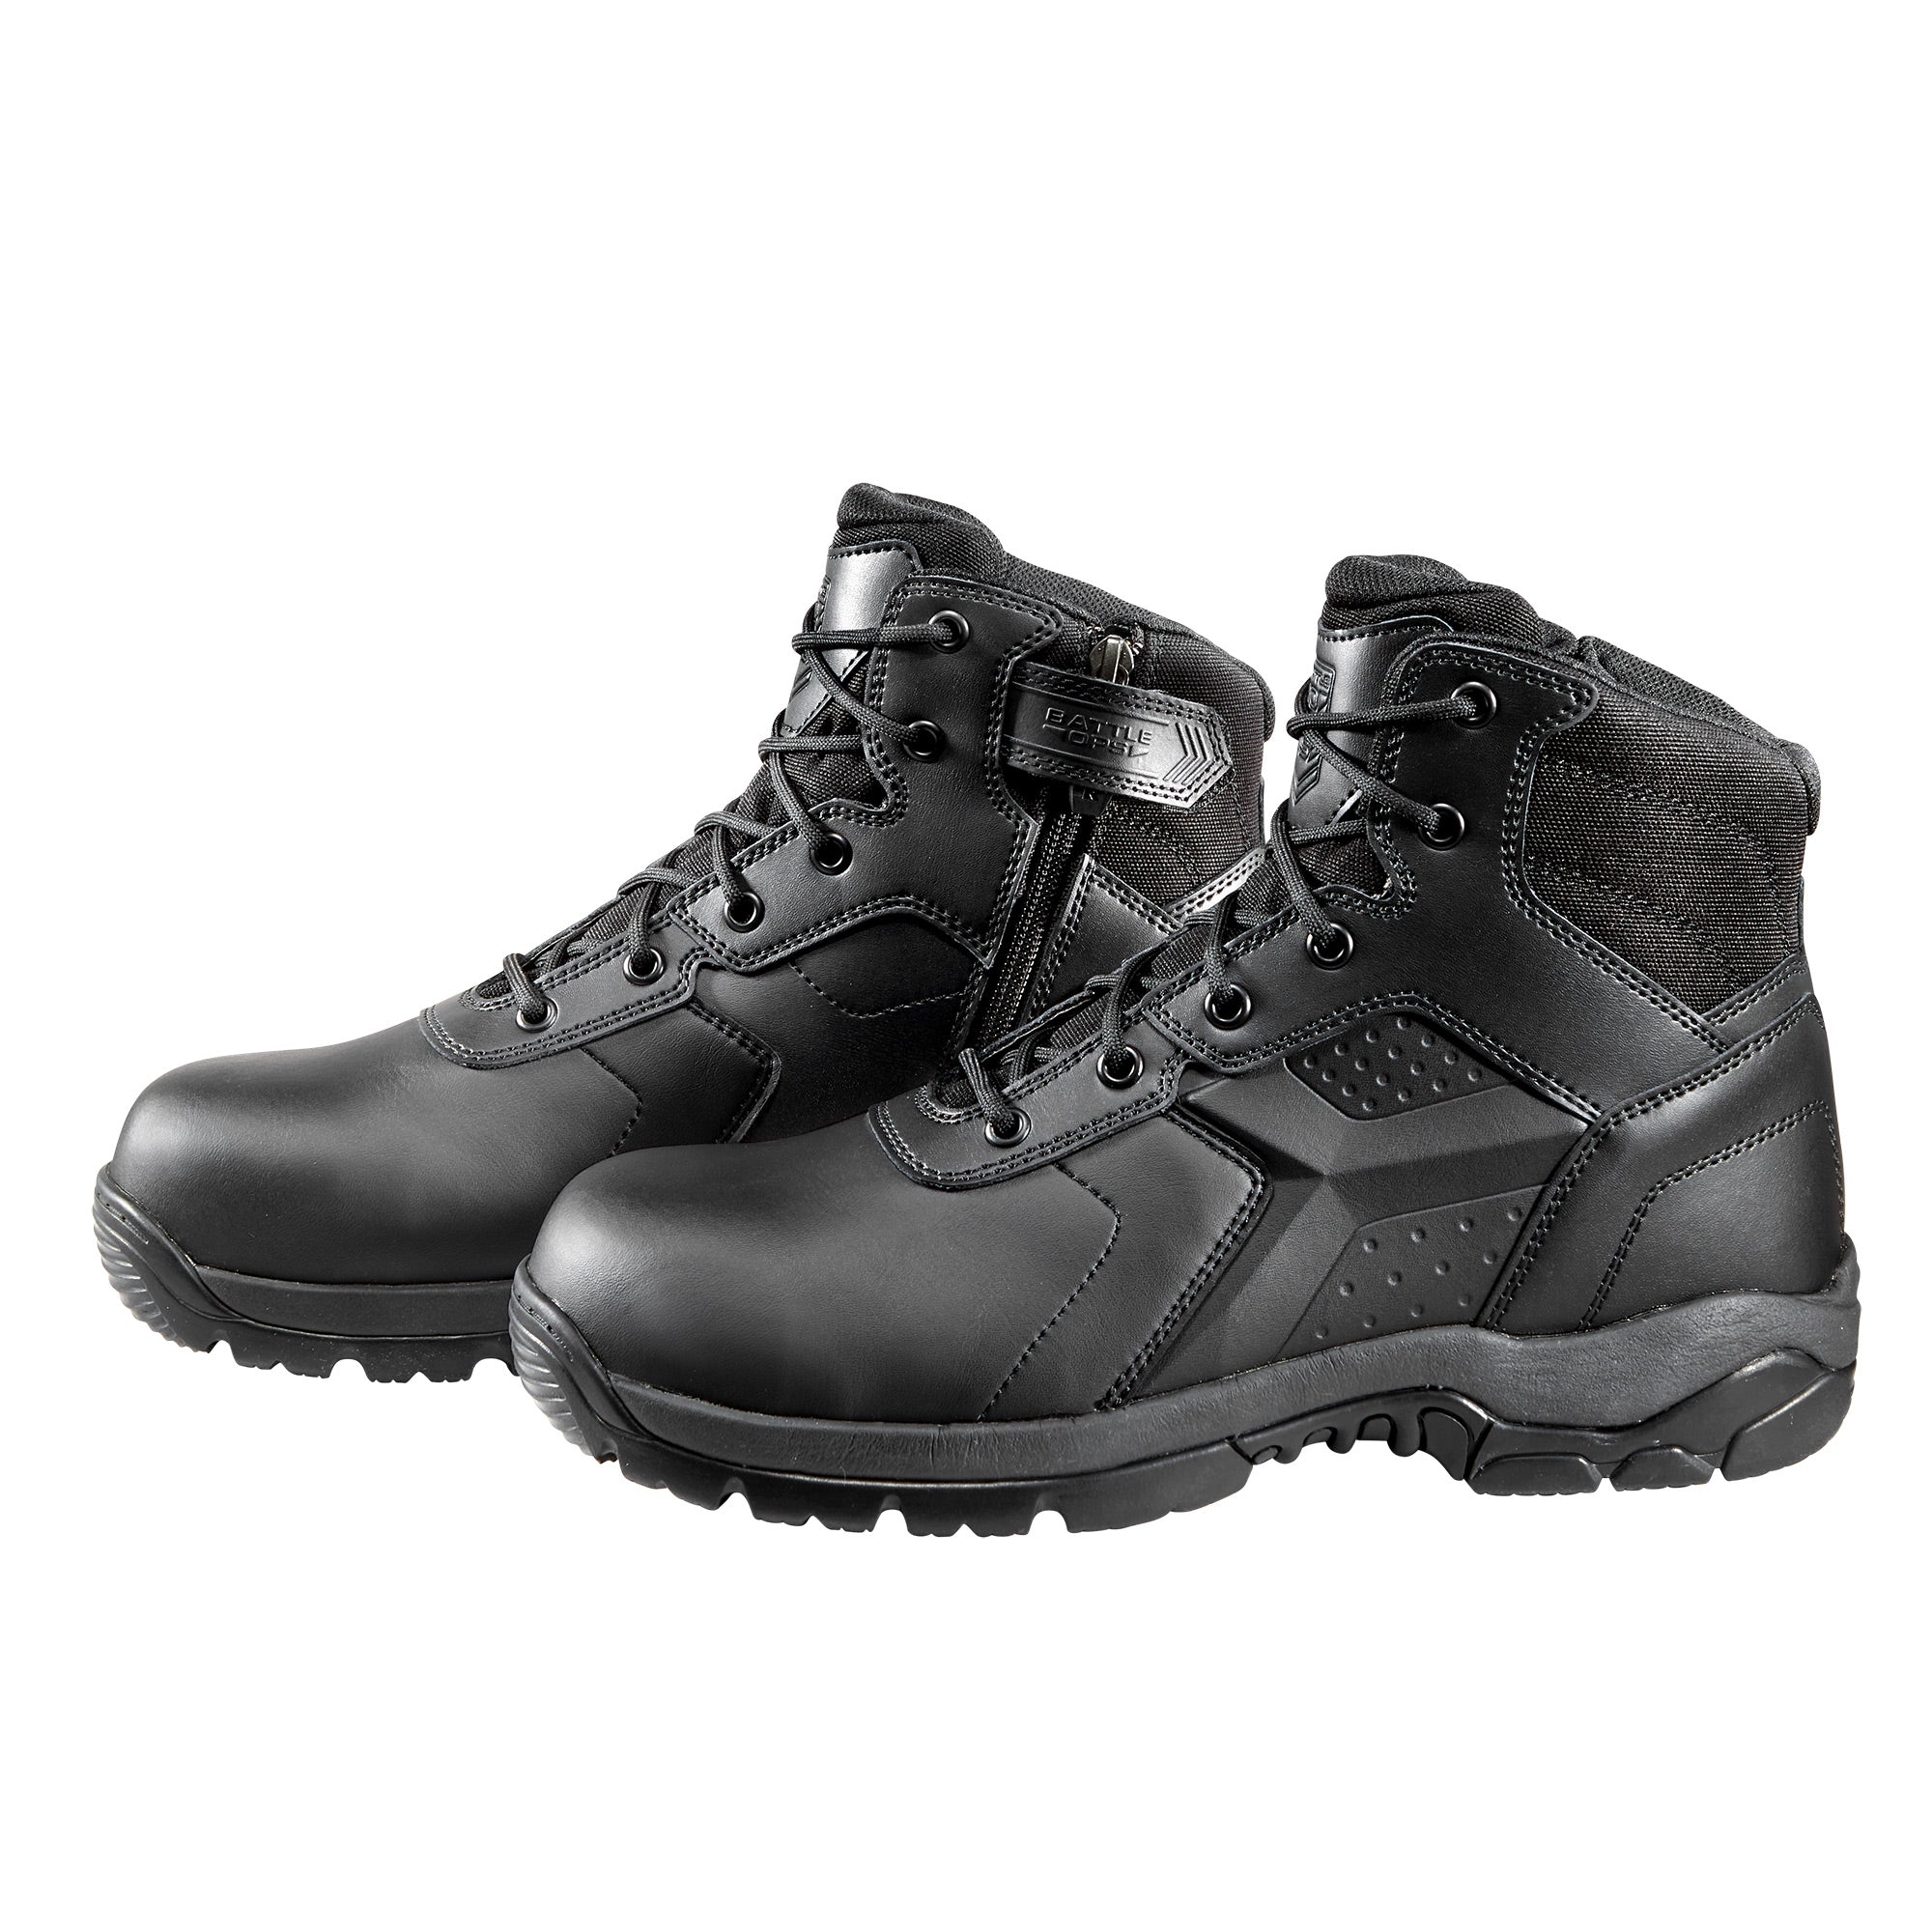 6-inch Waterproof Black Tactical Boot - Side Zip & Comp Safety Toe